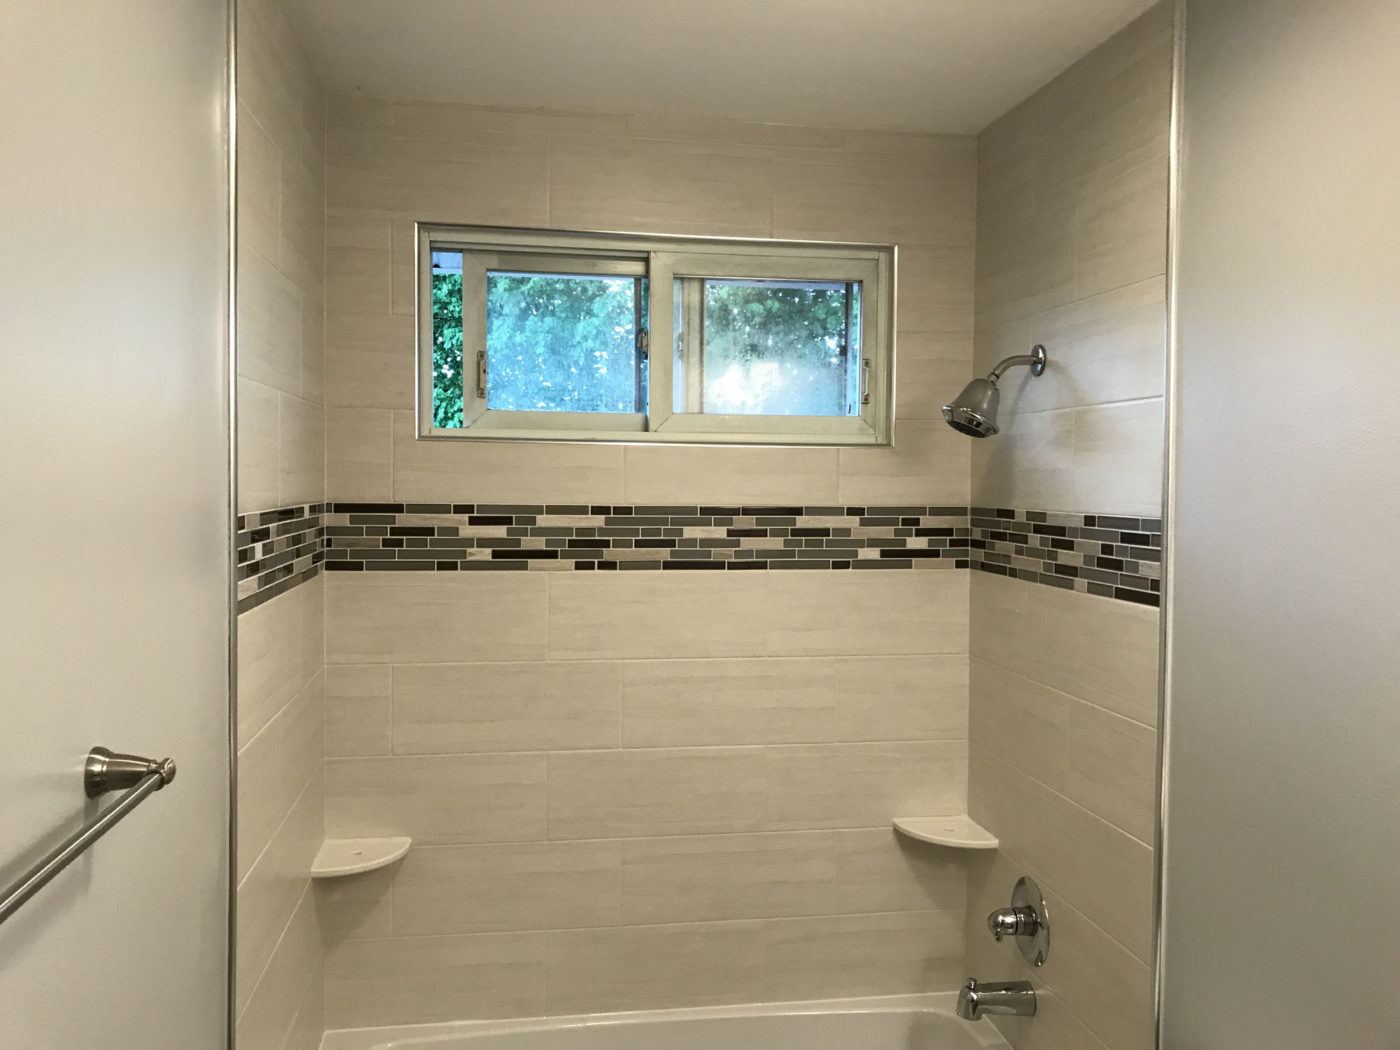 Bathroom remodeling in Hanover Park - new tub and shower, tiles